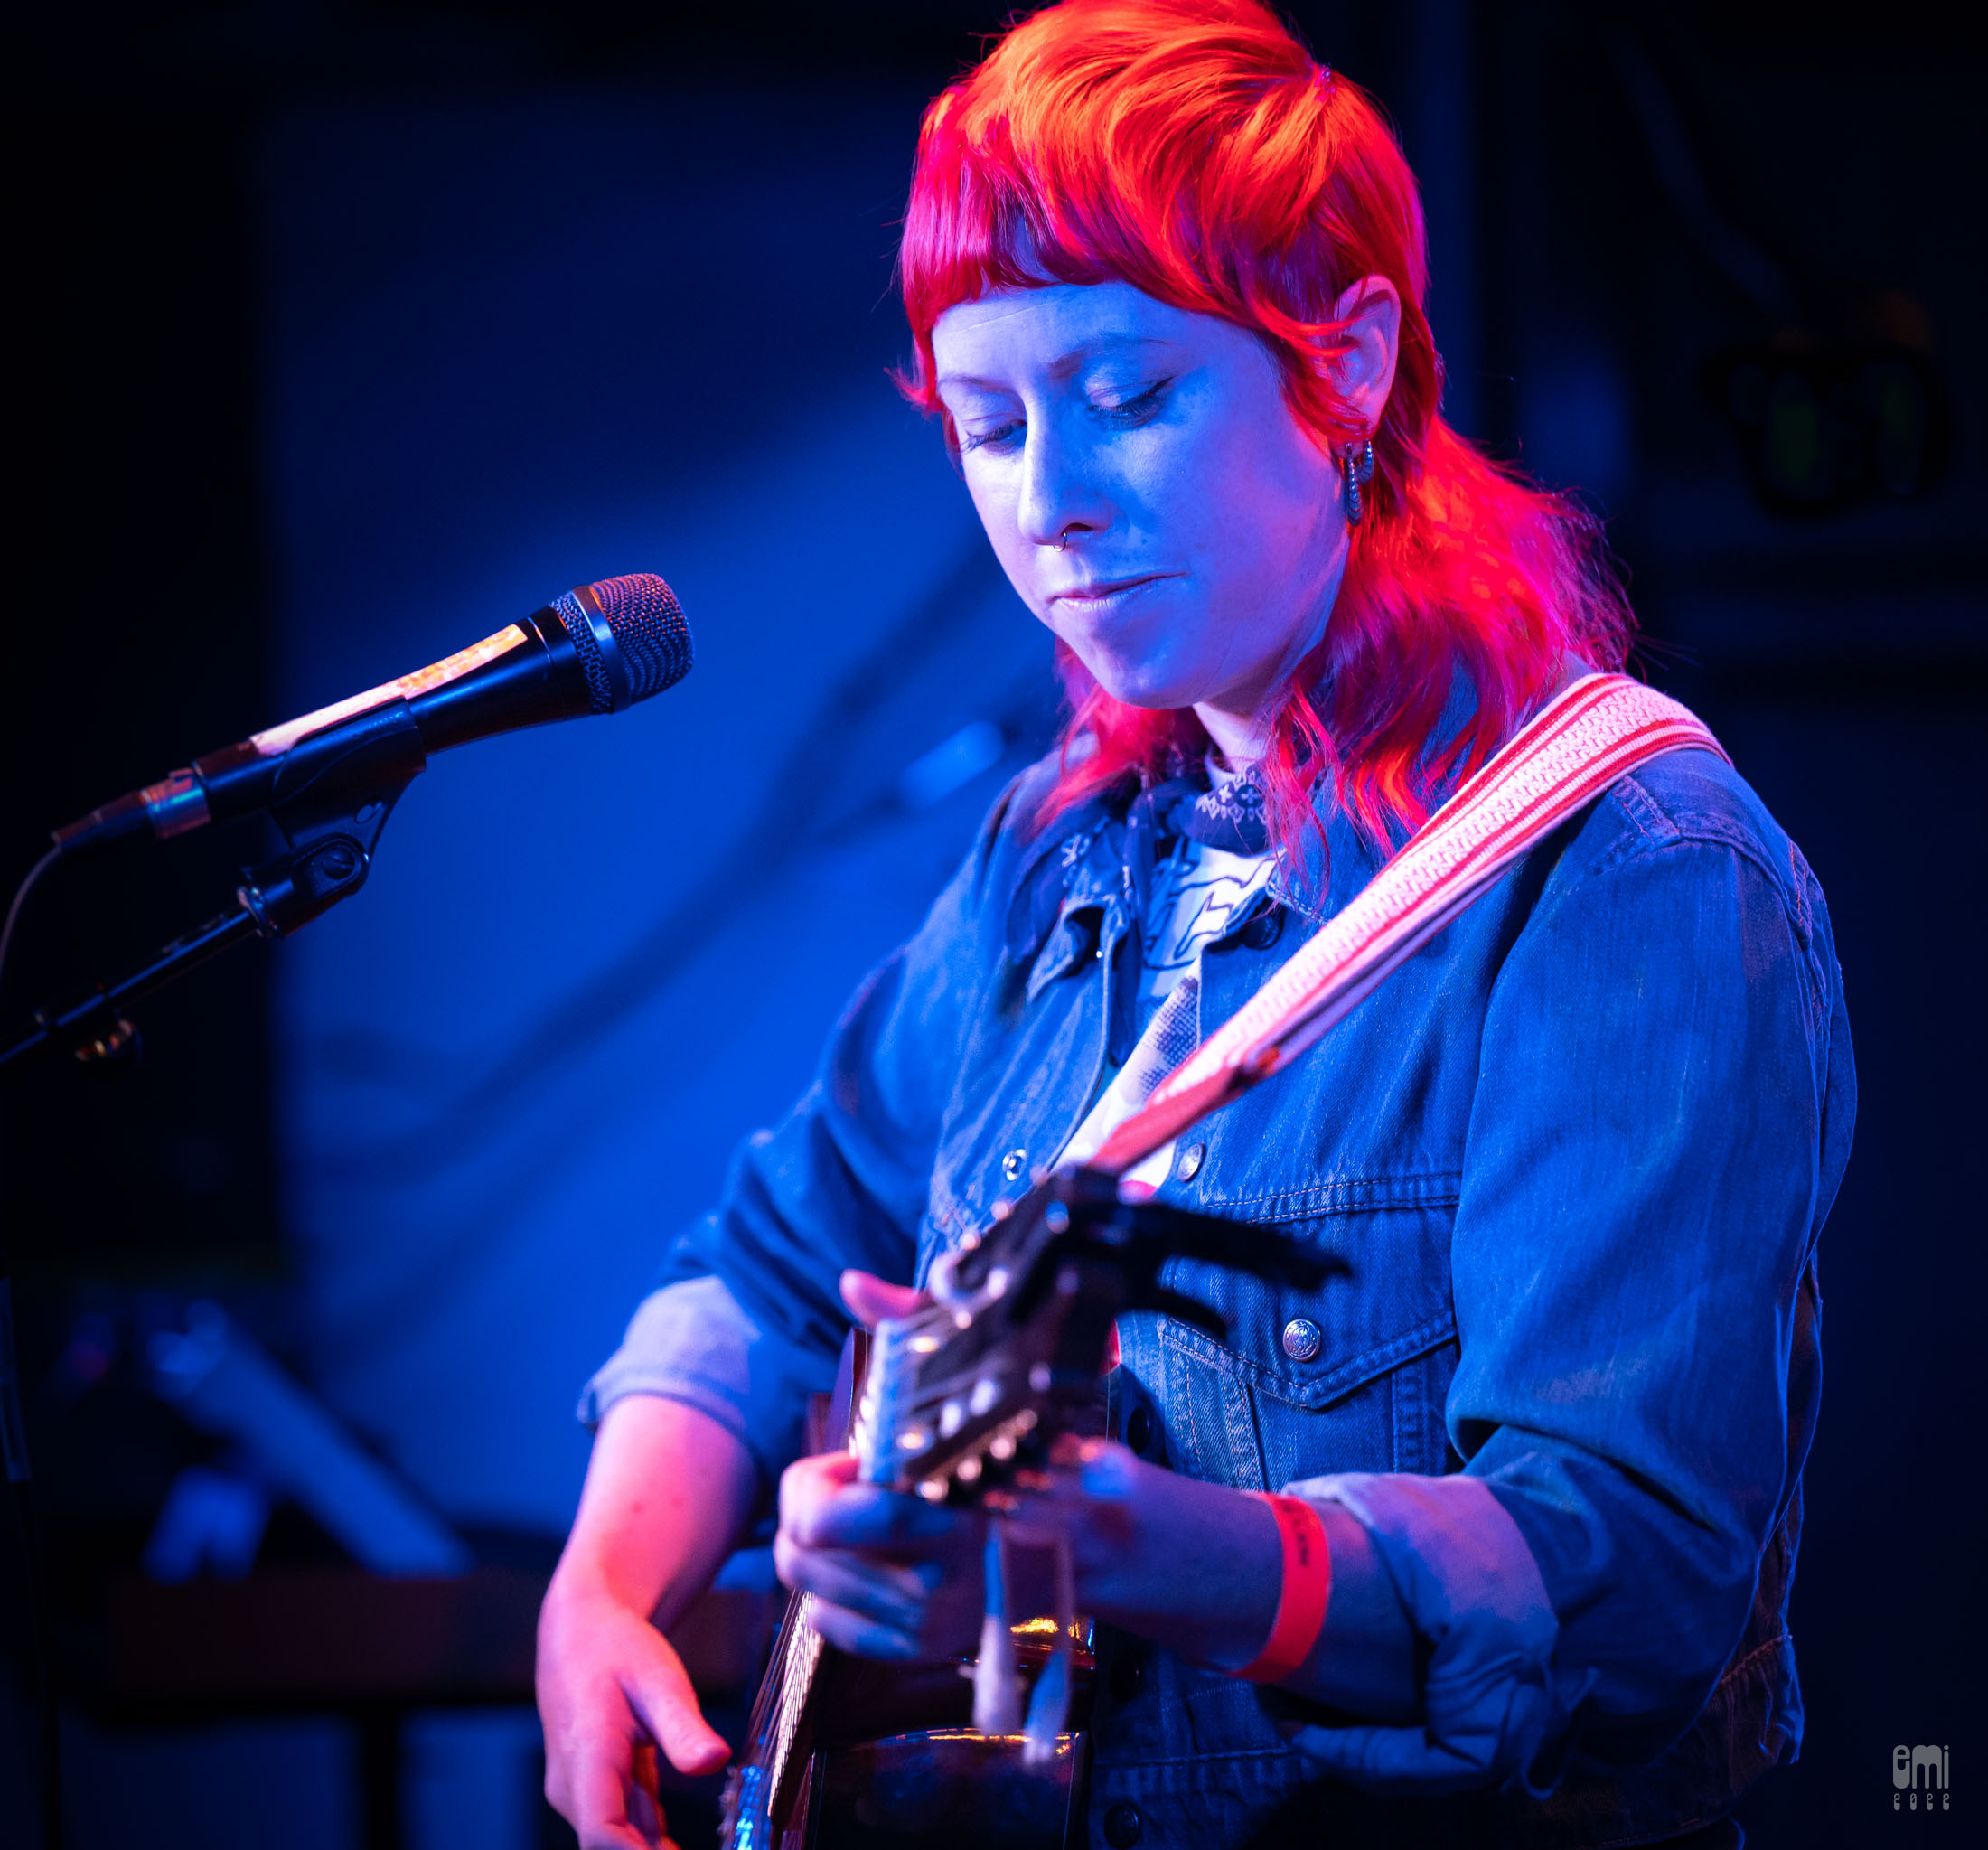 2022.11.29 Shannon Lay opens for THE MURLOCS at Moes Alley, Santa Cruz, CA. photo by emi